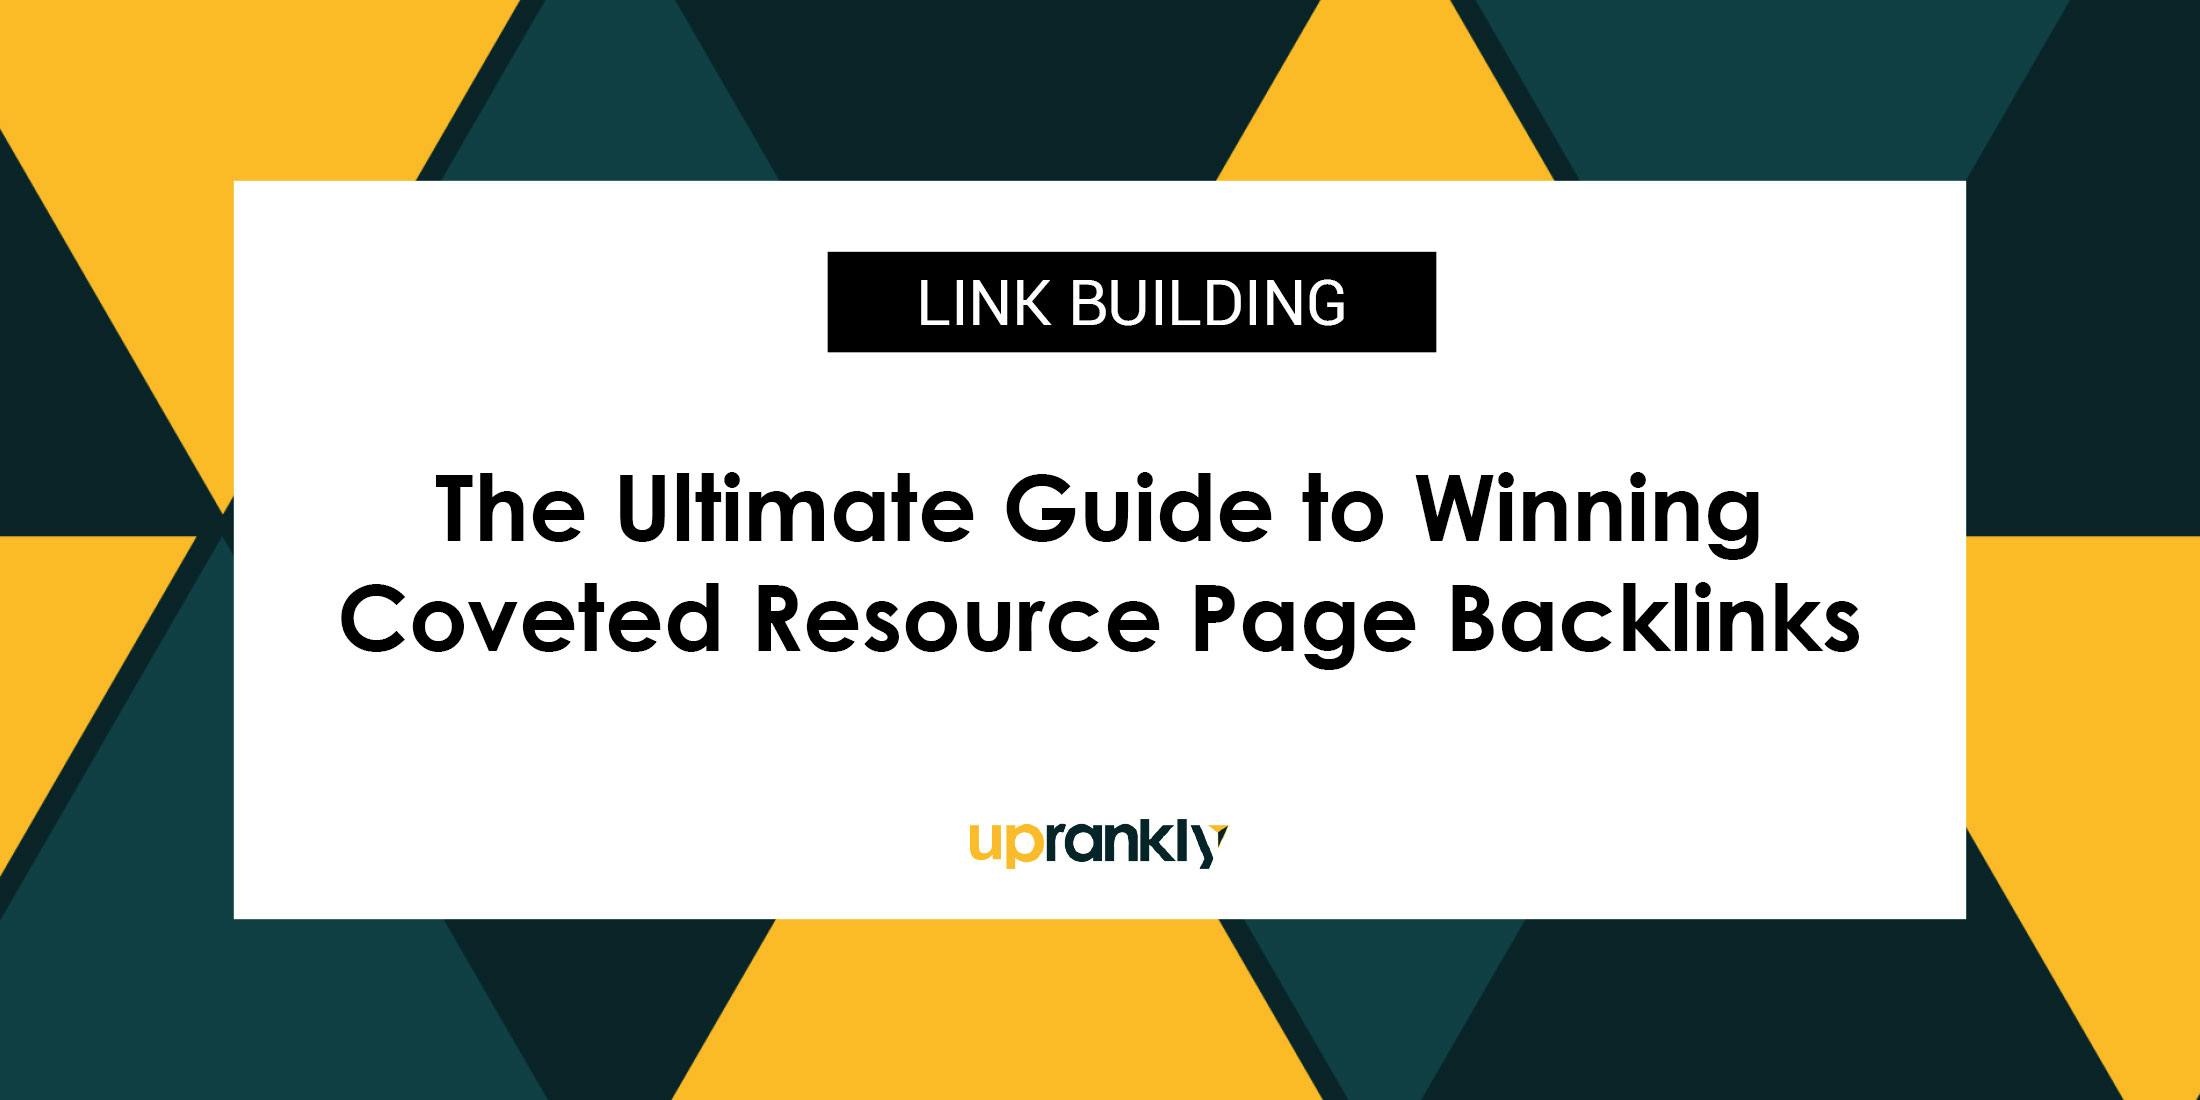 The Ultimate Guide to Winning Coveted Resource Page Backlinks